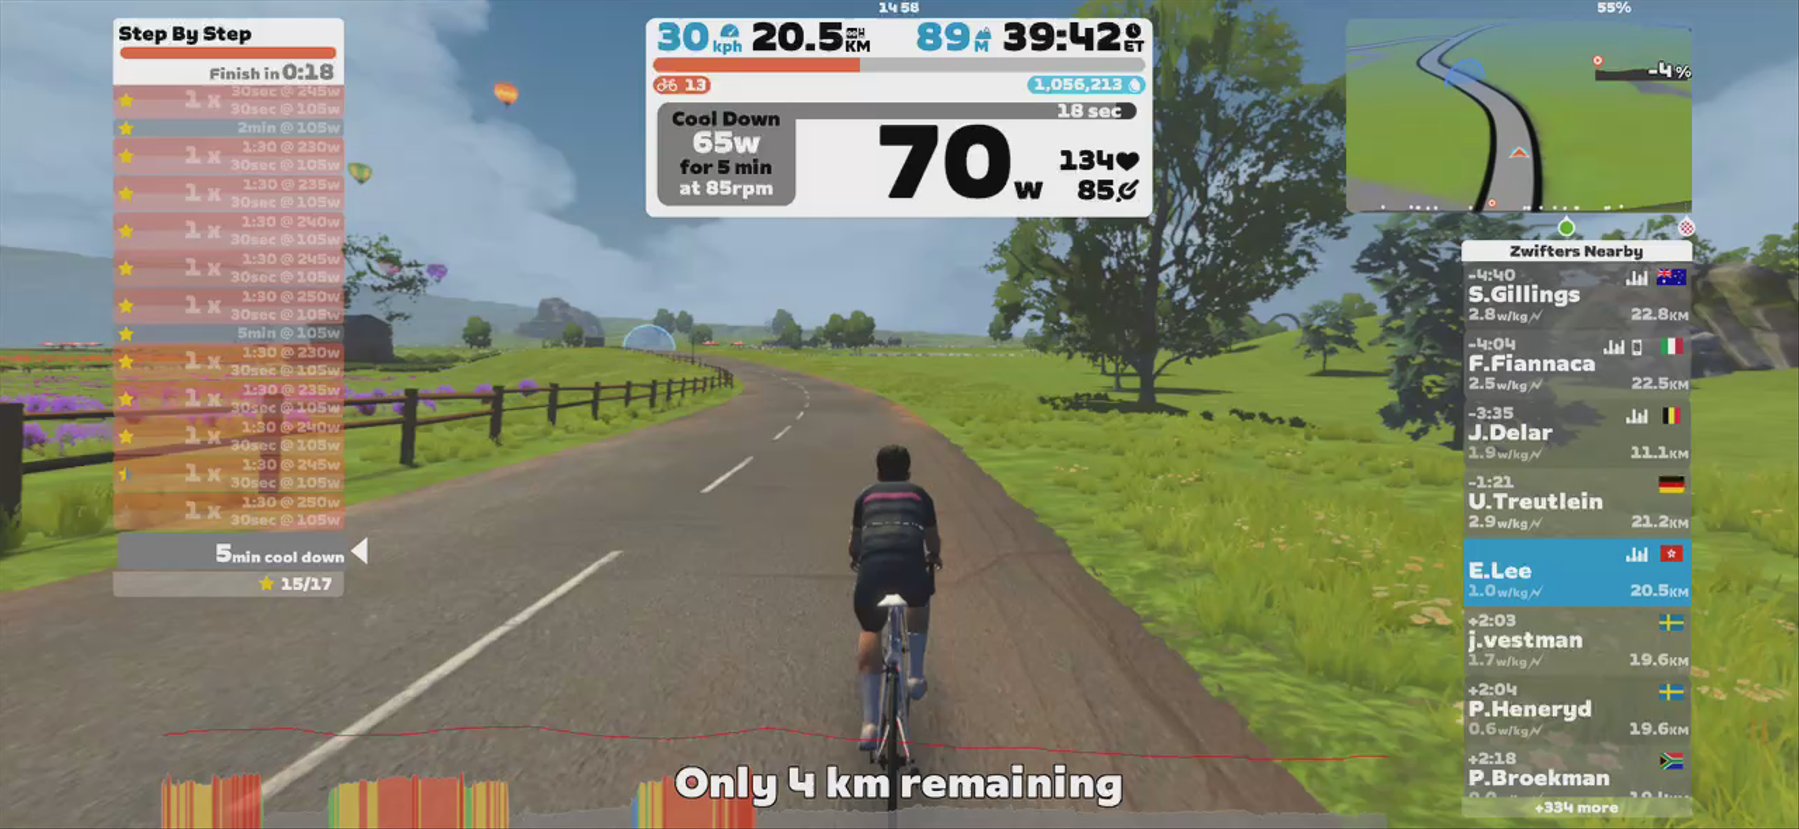 Zwift - Step By Step on Lutece Express in France